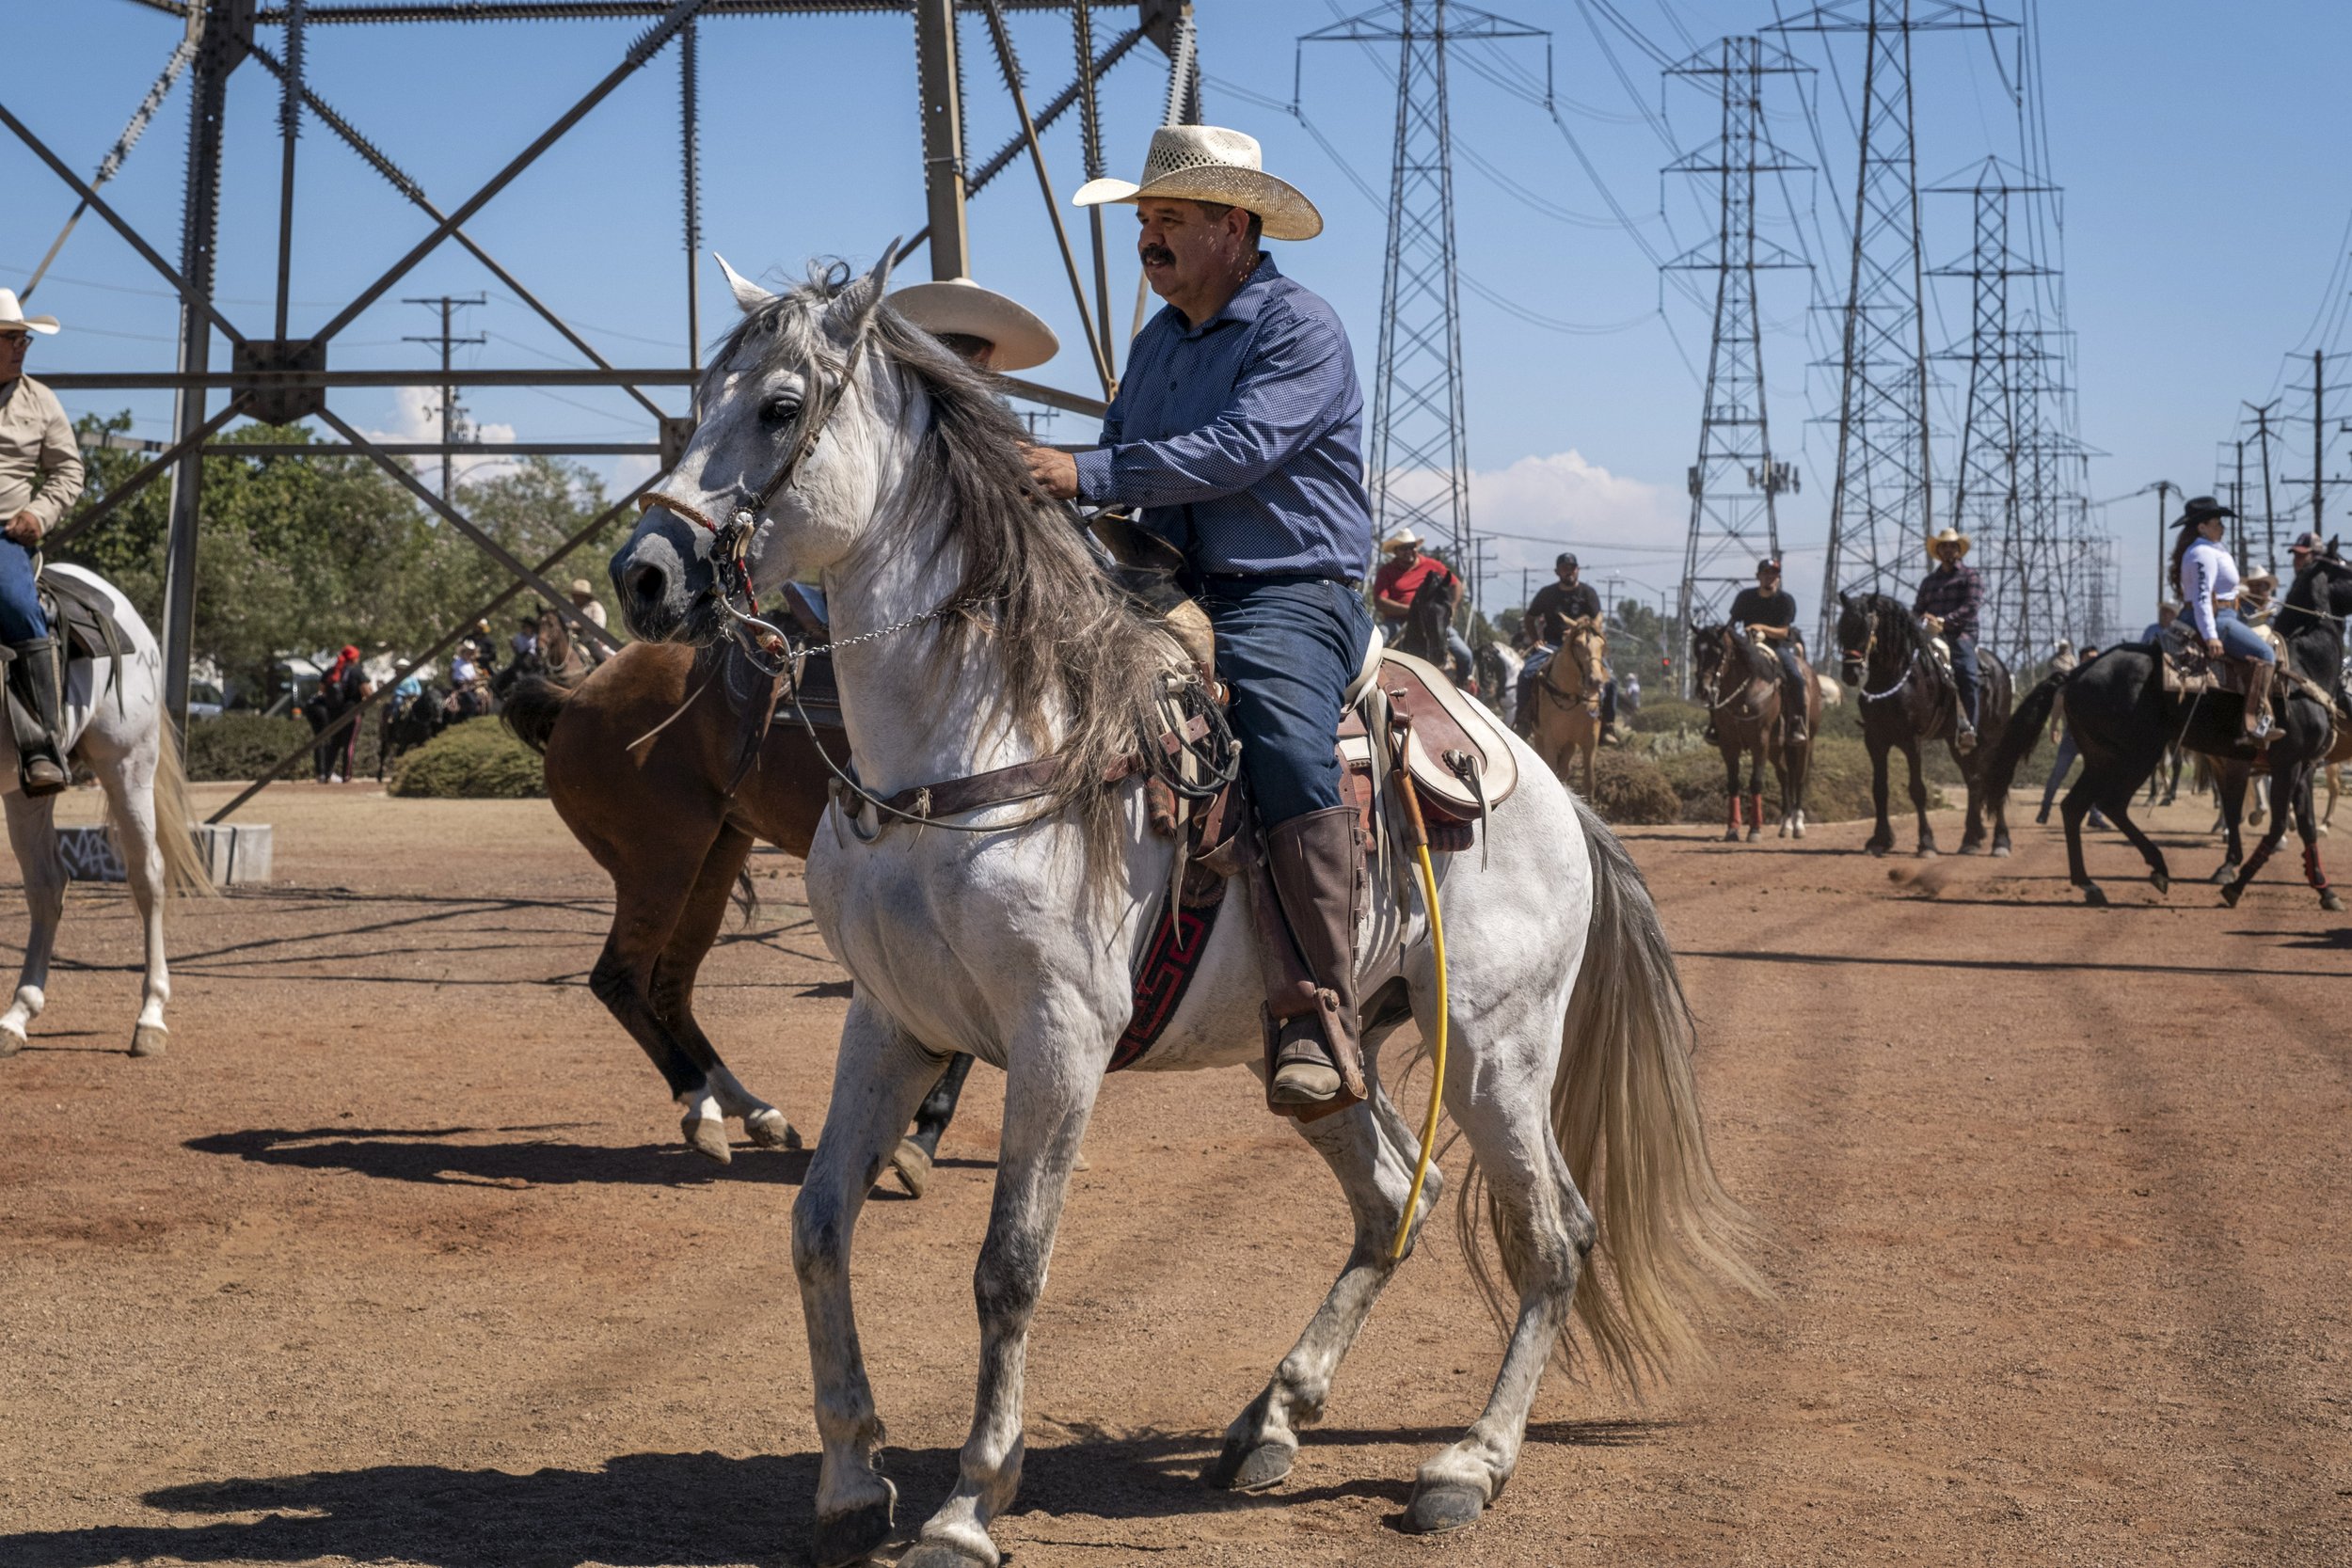  Some riders gather on the land that is parallel between Greenleaf Blvd and Walton Middle School, where a row of electrical towers form a line. Compton, Calif. on Sunday, Sept 25. (Anna Sophia Moltke | The Corsair) 